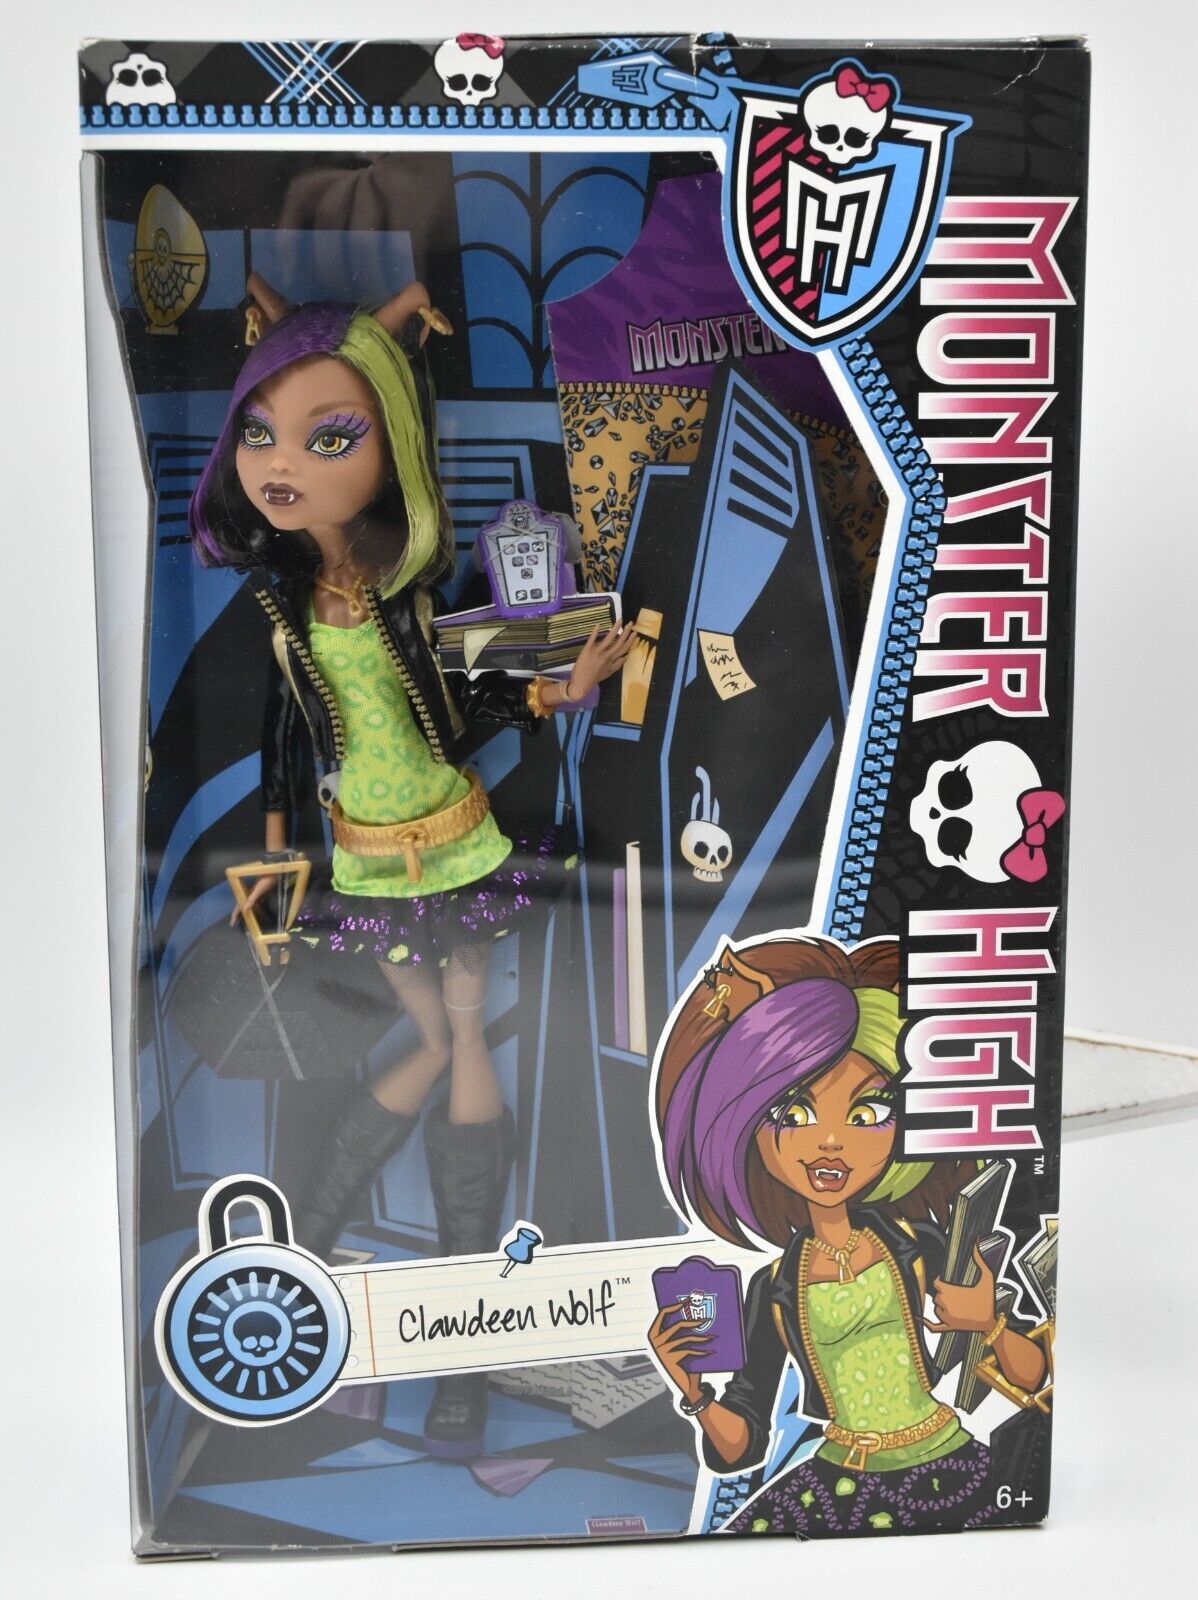 april schmitz recommends pictures of clawdeen from monster high pic